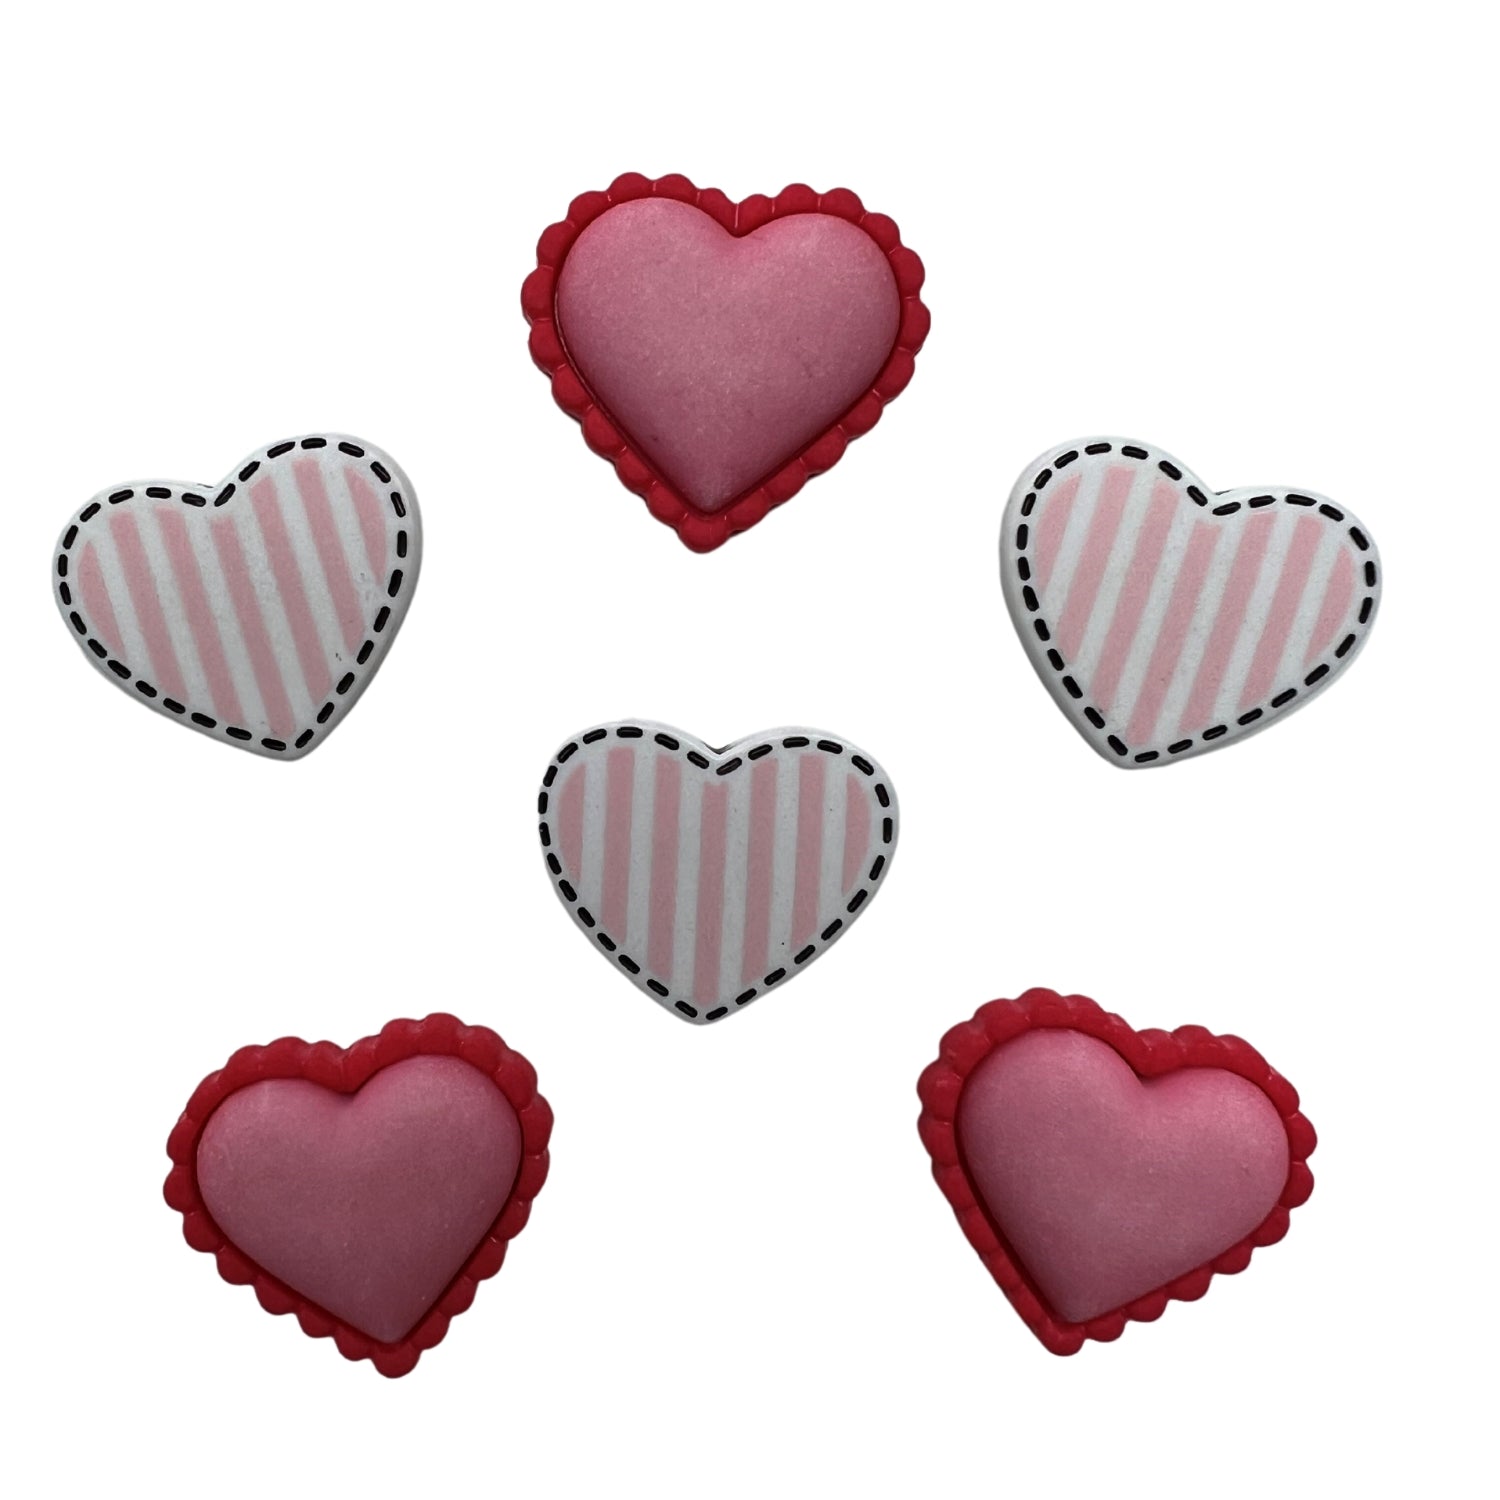  Buttons Galore Flatback Embellishments for Crafts & DIY  Projects - Valentine Conversation Hearts - 24 Embellishments